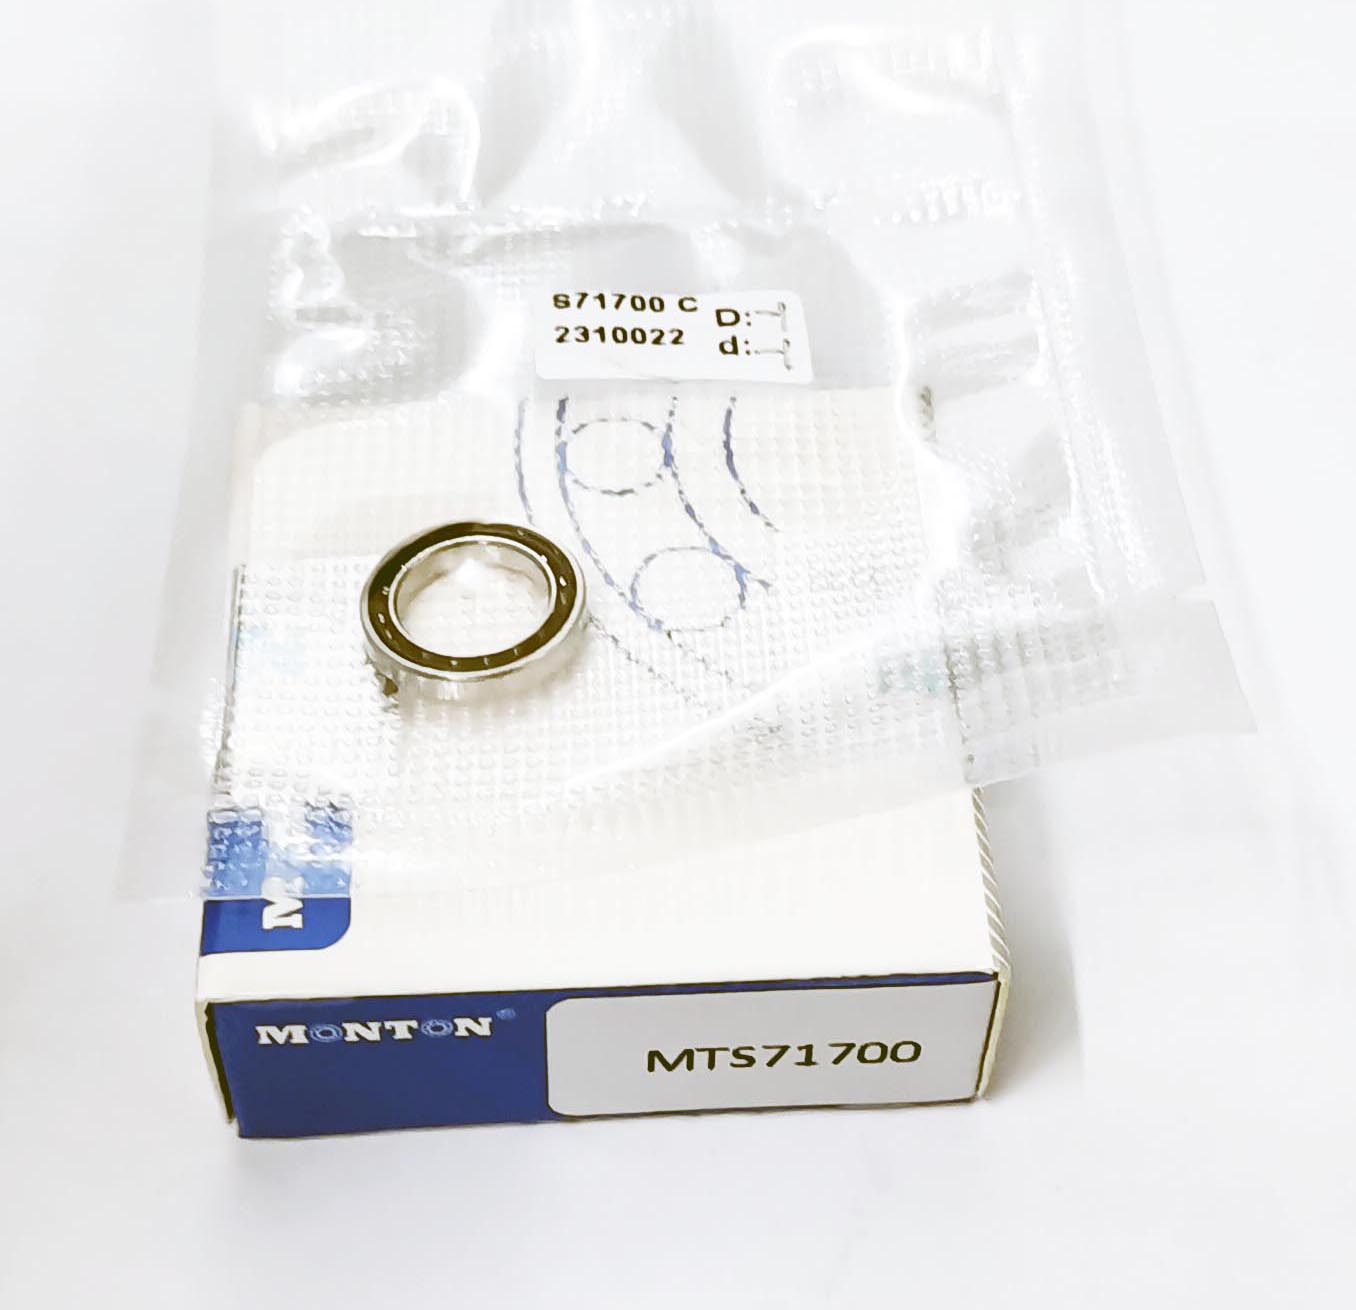 MTS71700 slim thin section high speed high precsion military missile camera tracking bearing